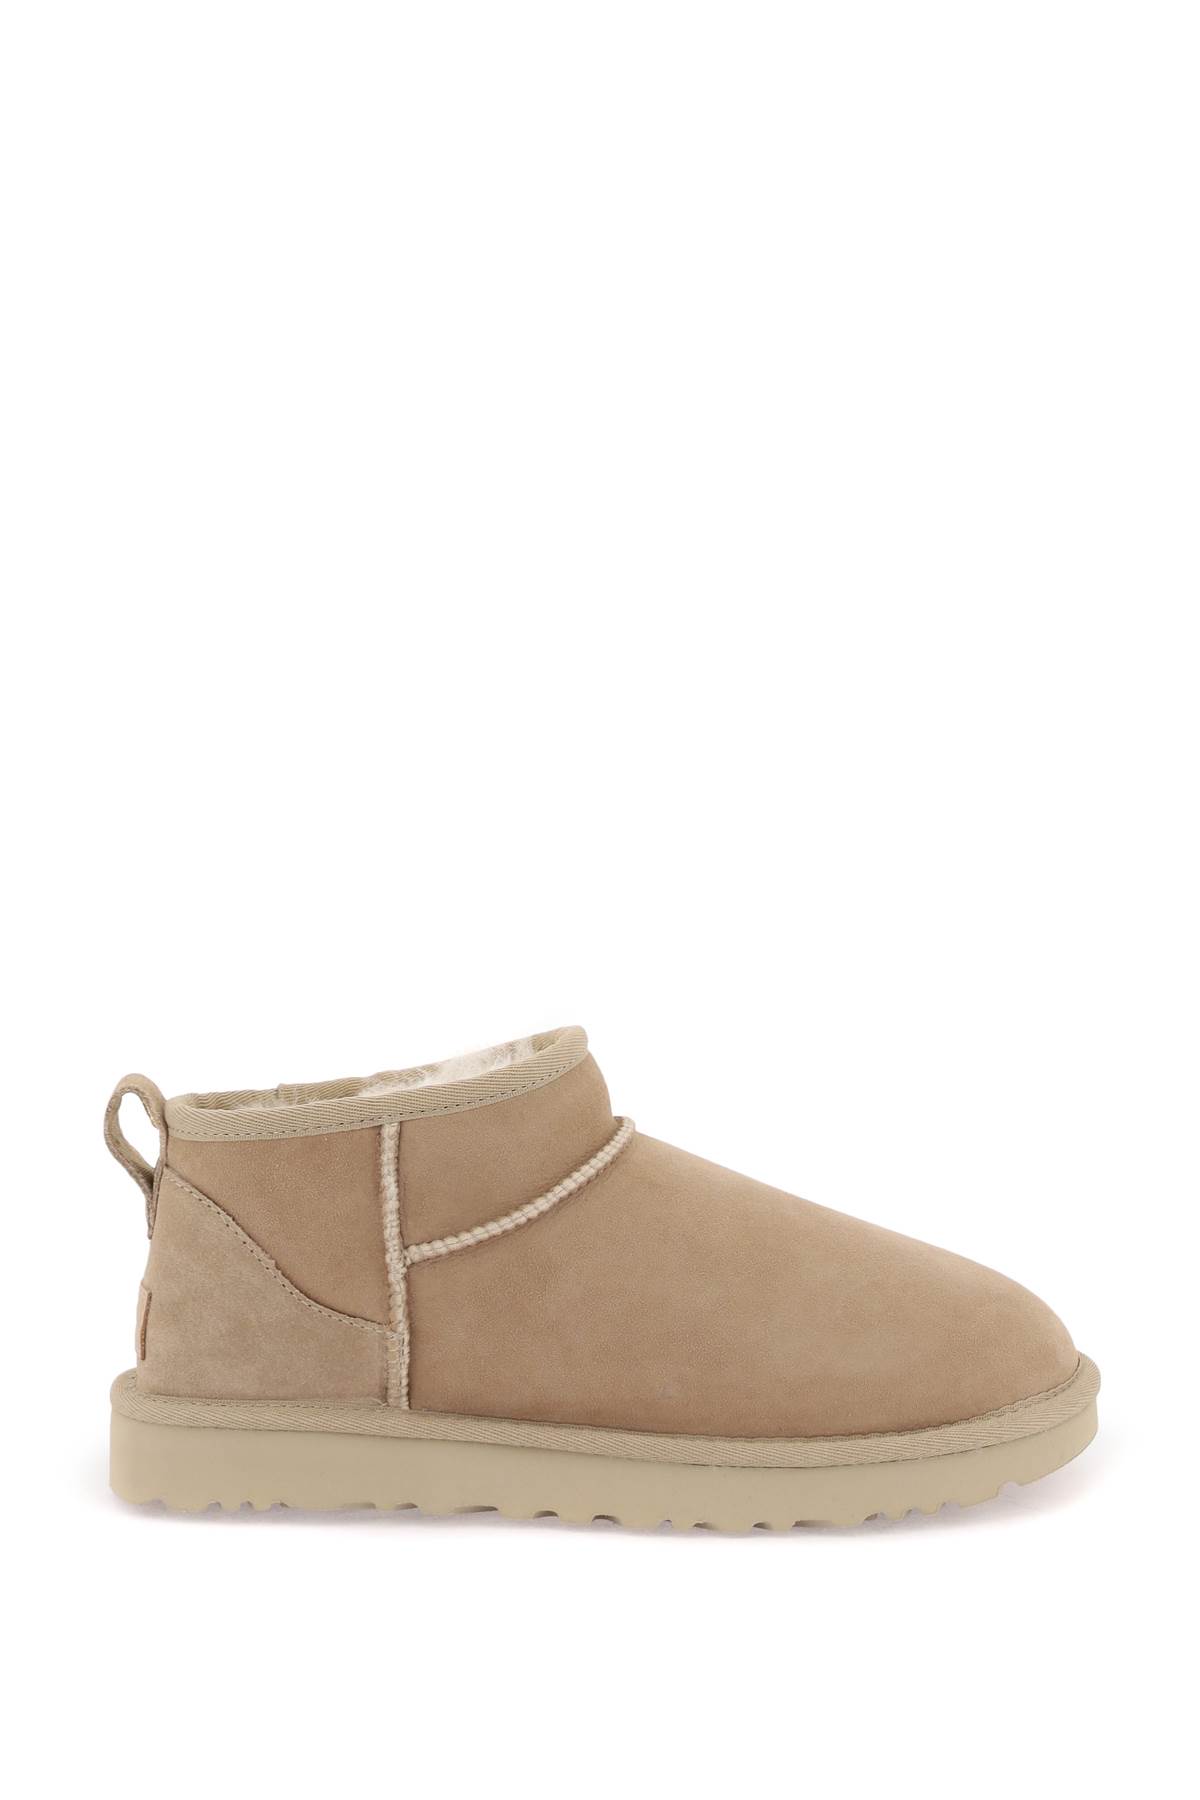 Shop Ugg Classic Ultra Mini Ankle Boots In Sand